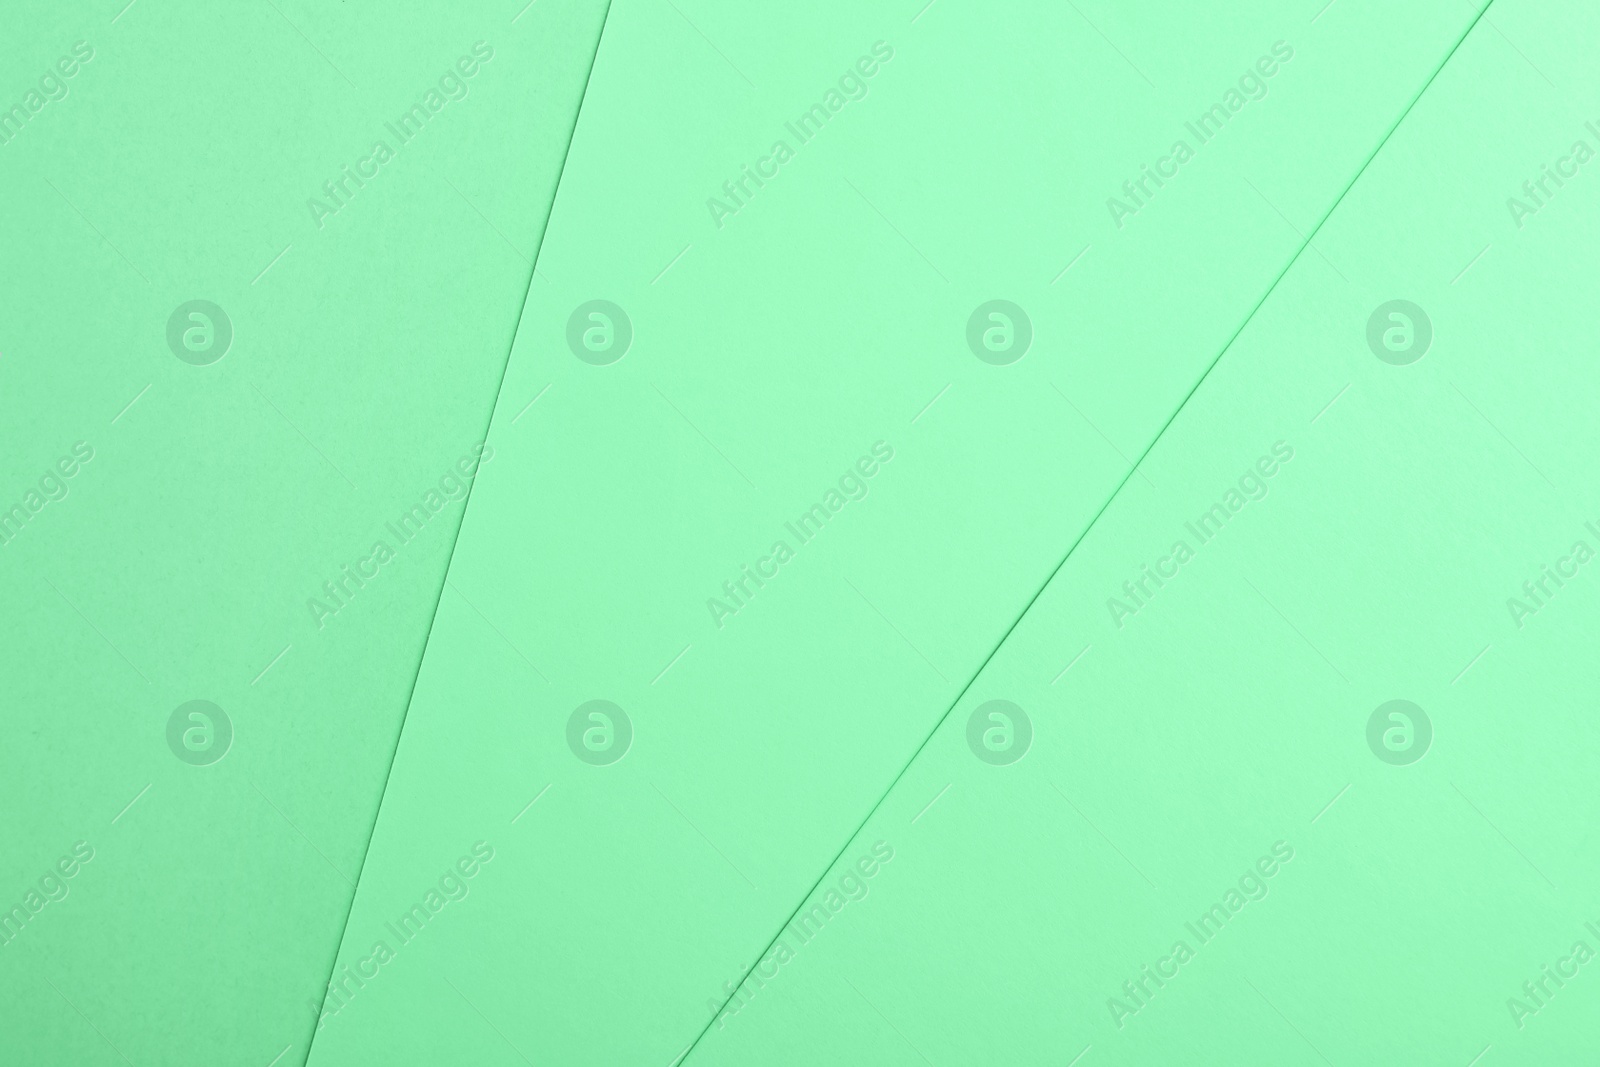 Image of Paper sheets as background. Image toned in mint color 